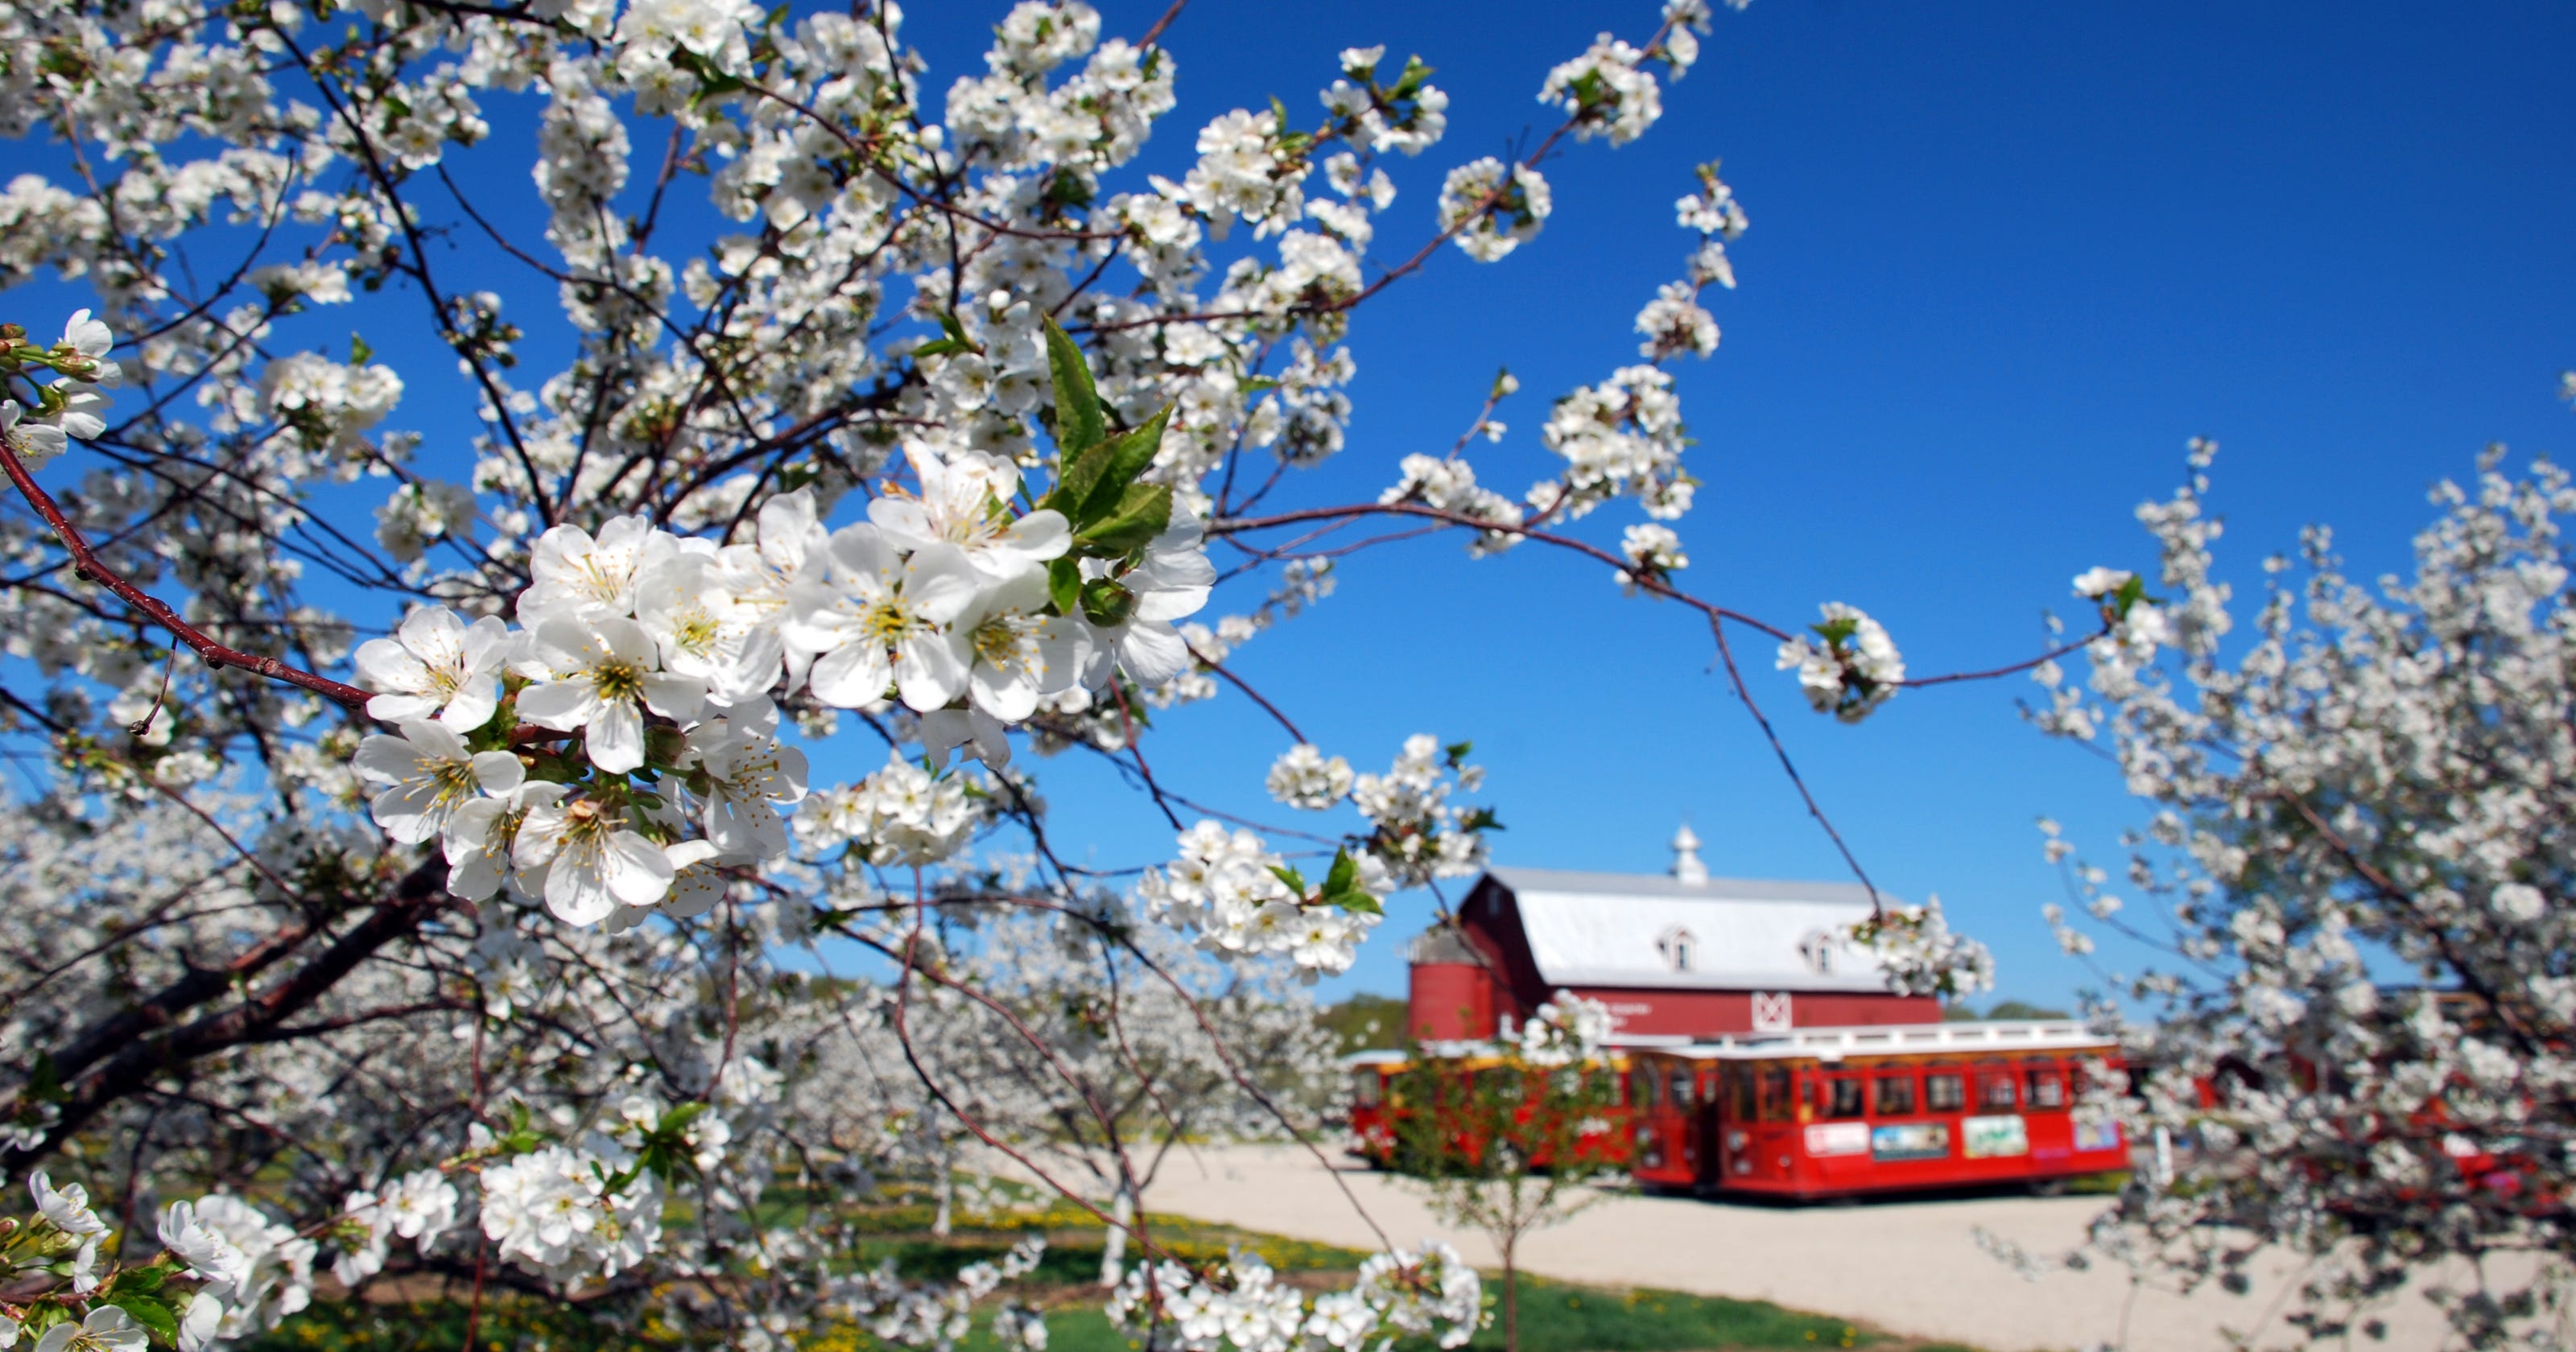 Door County's cherry blossoms put on a dazzling display every spring